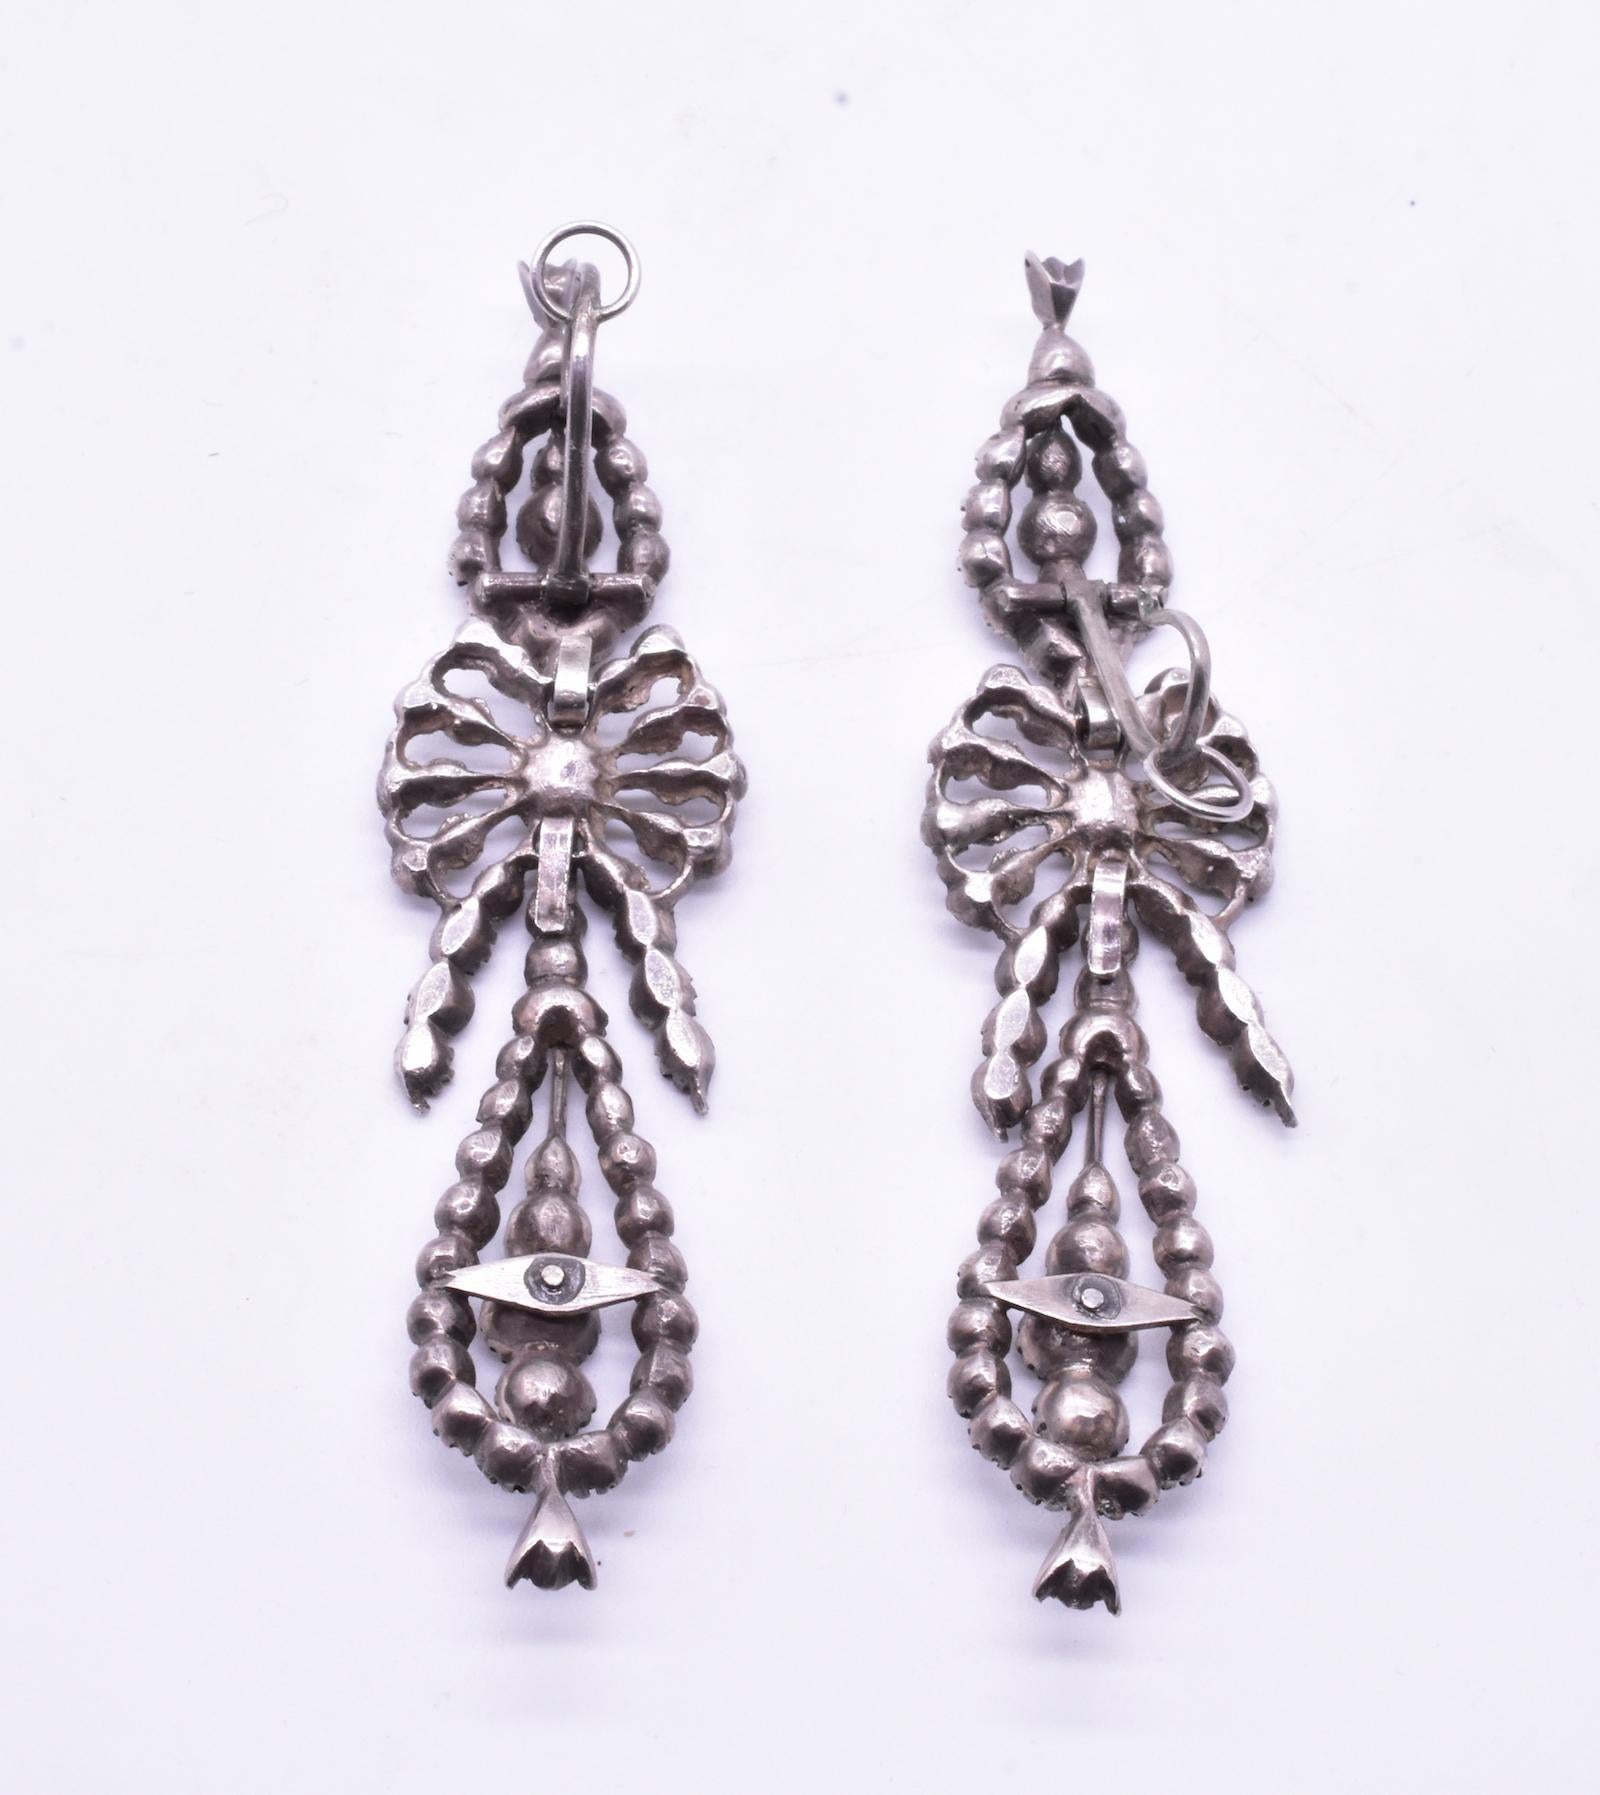 Antique  Black Dot Portuguese Paste and Silver Earrings c1780 In Excellent Condition For Sale In Baltimore, MD